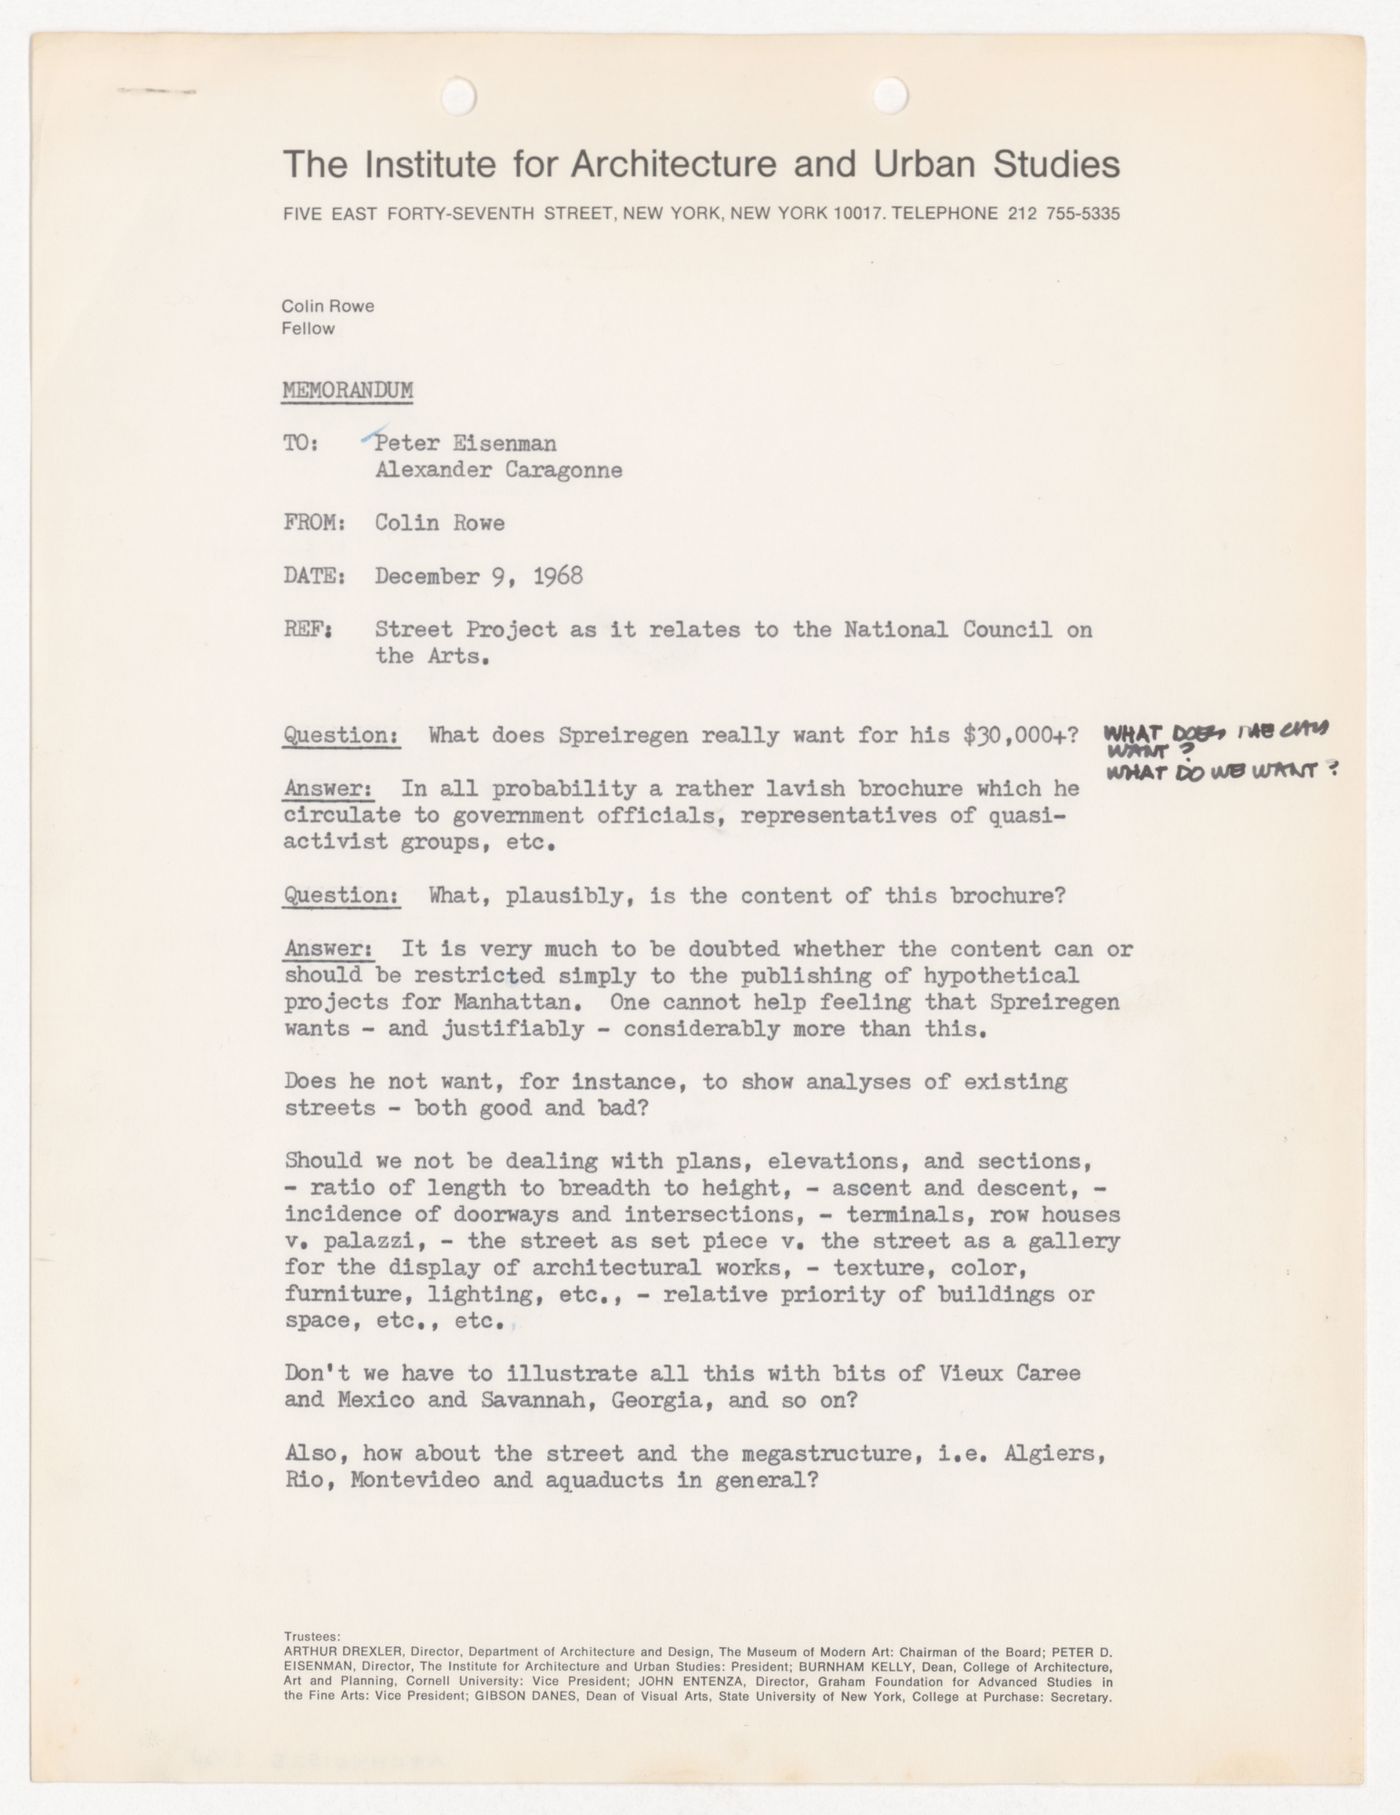 Memorandum from Colin Rowe to Peter D. Eisenman and Alexander Caragonne about IAUS Street Project with annotations by Peter D. Eisenman